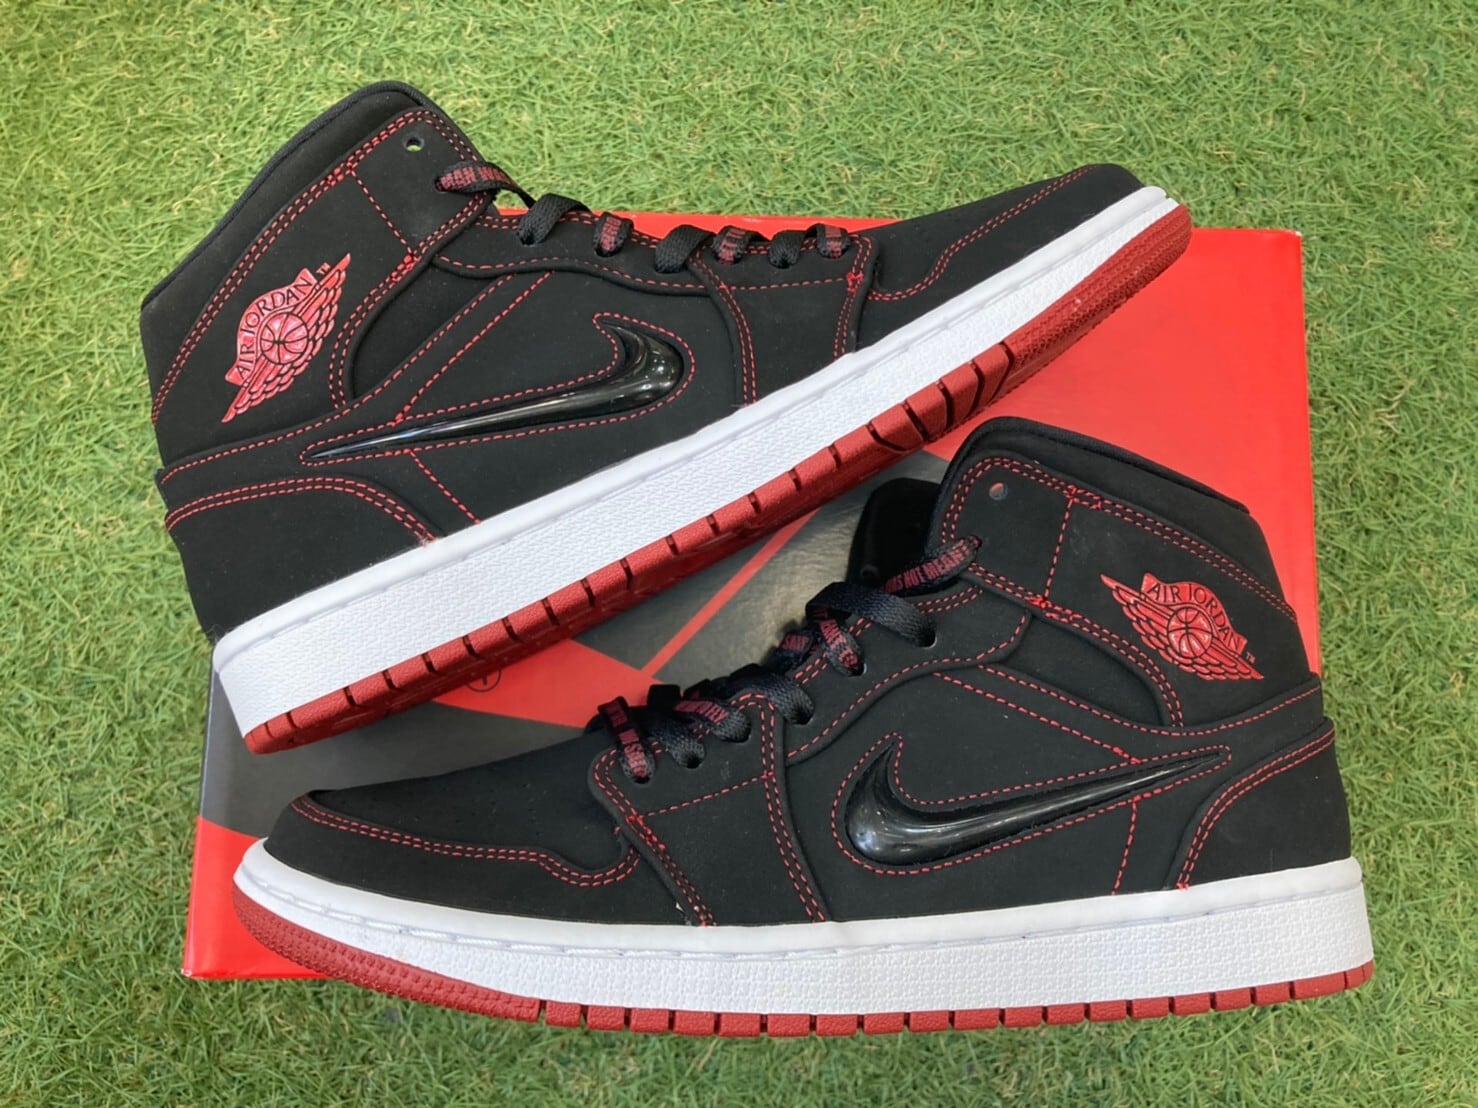 JORDAN 1 MID FEARLESS “COME FLY WITH ME”